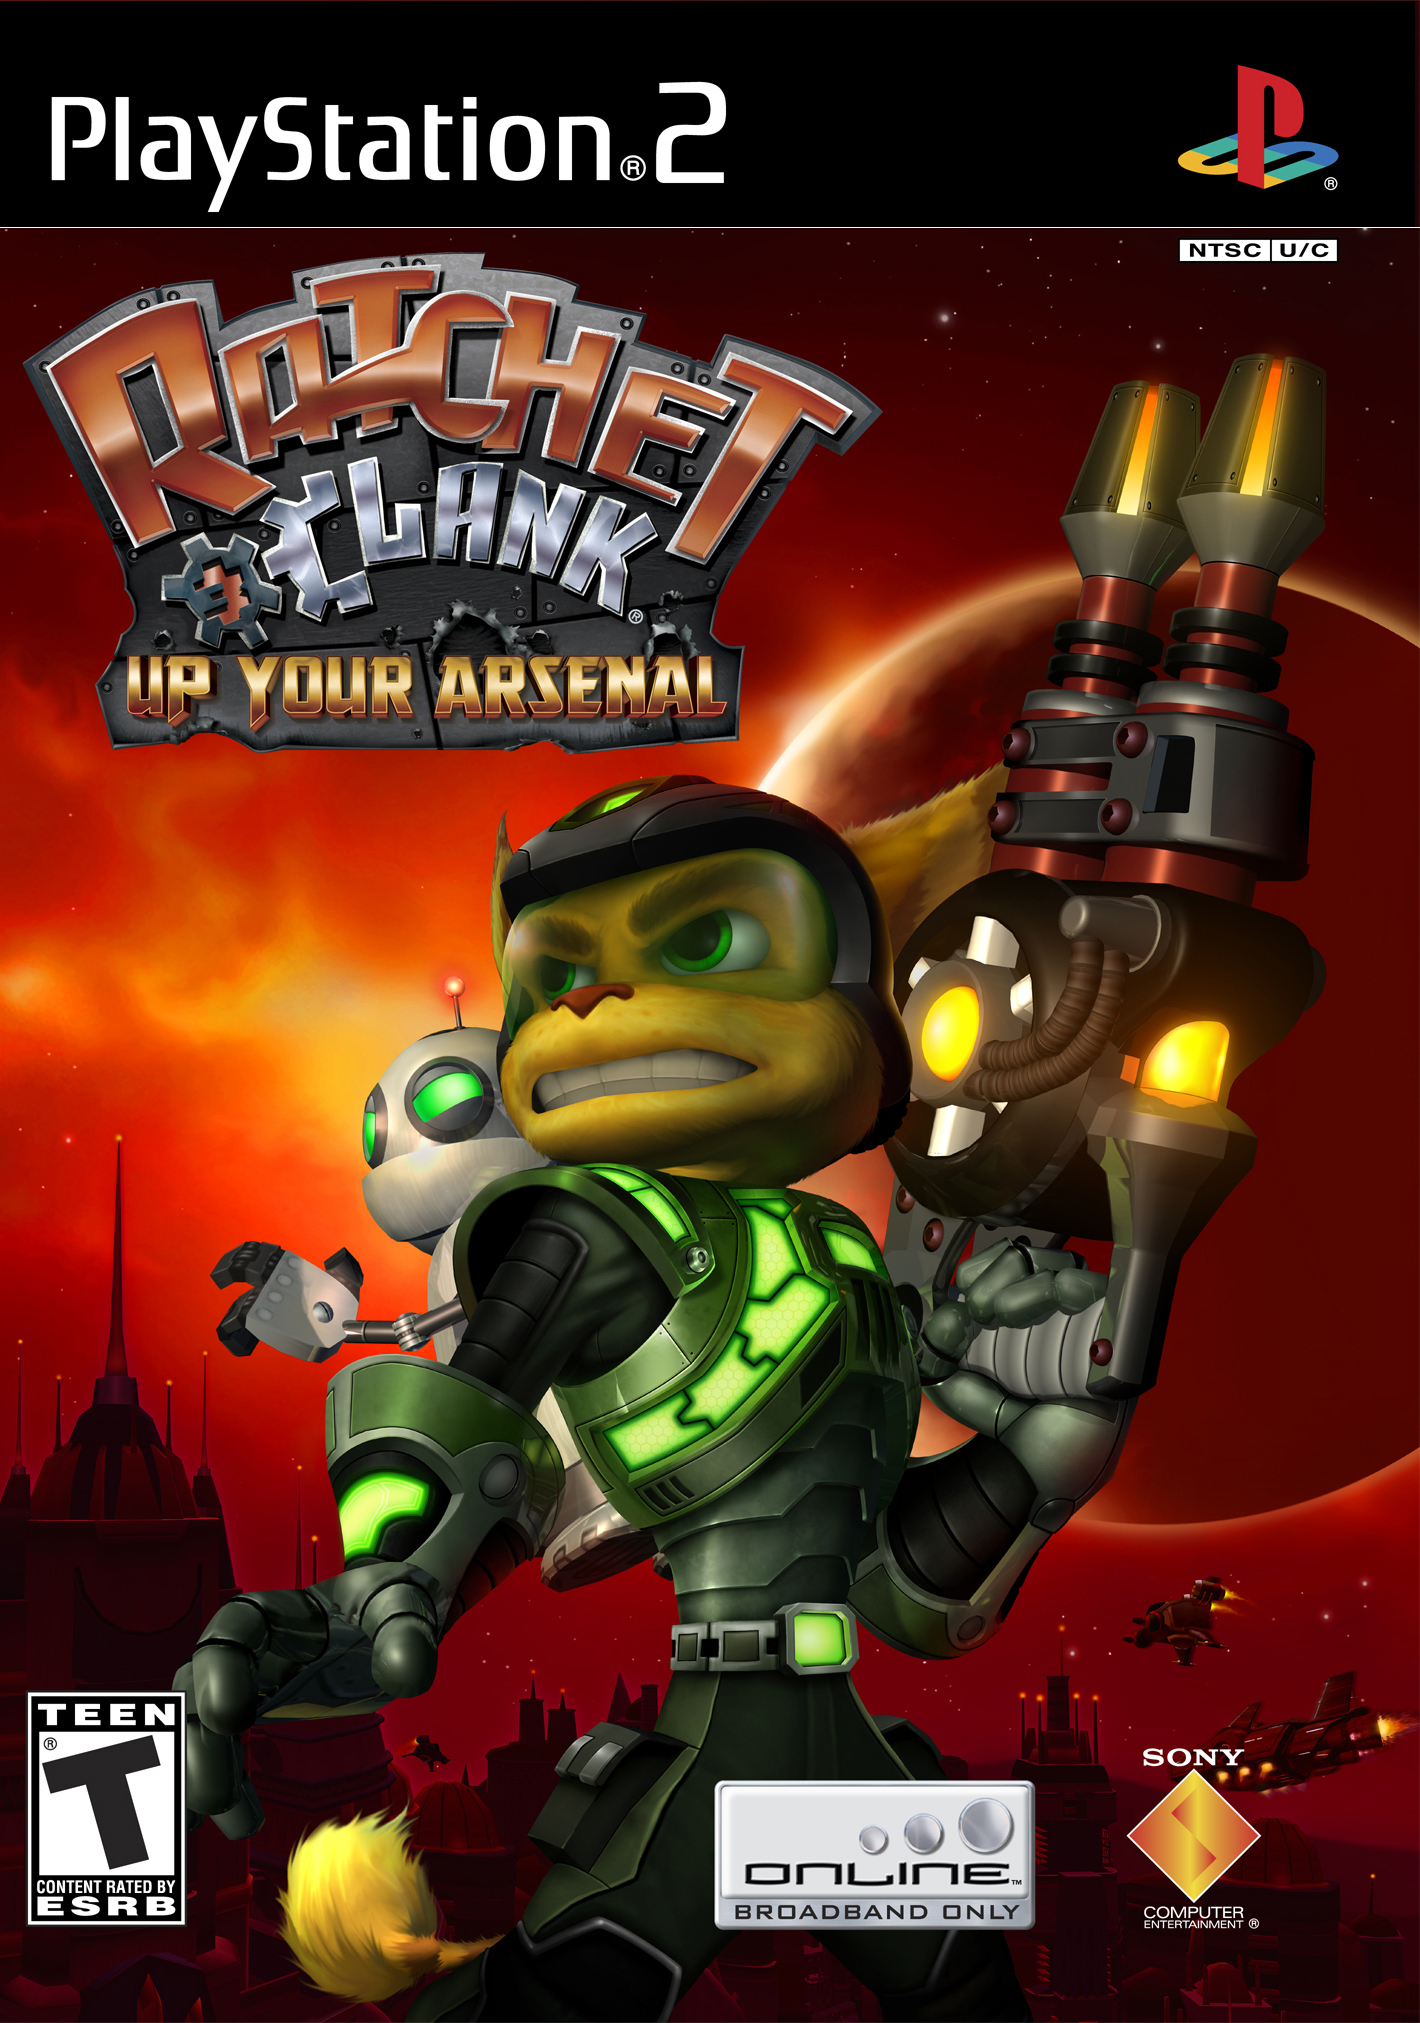 best ratchet and clank ps3